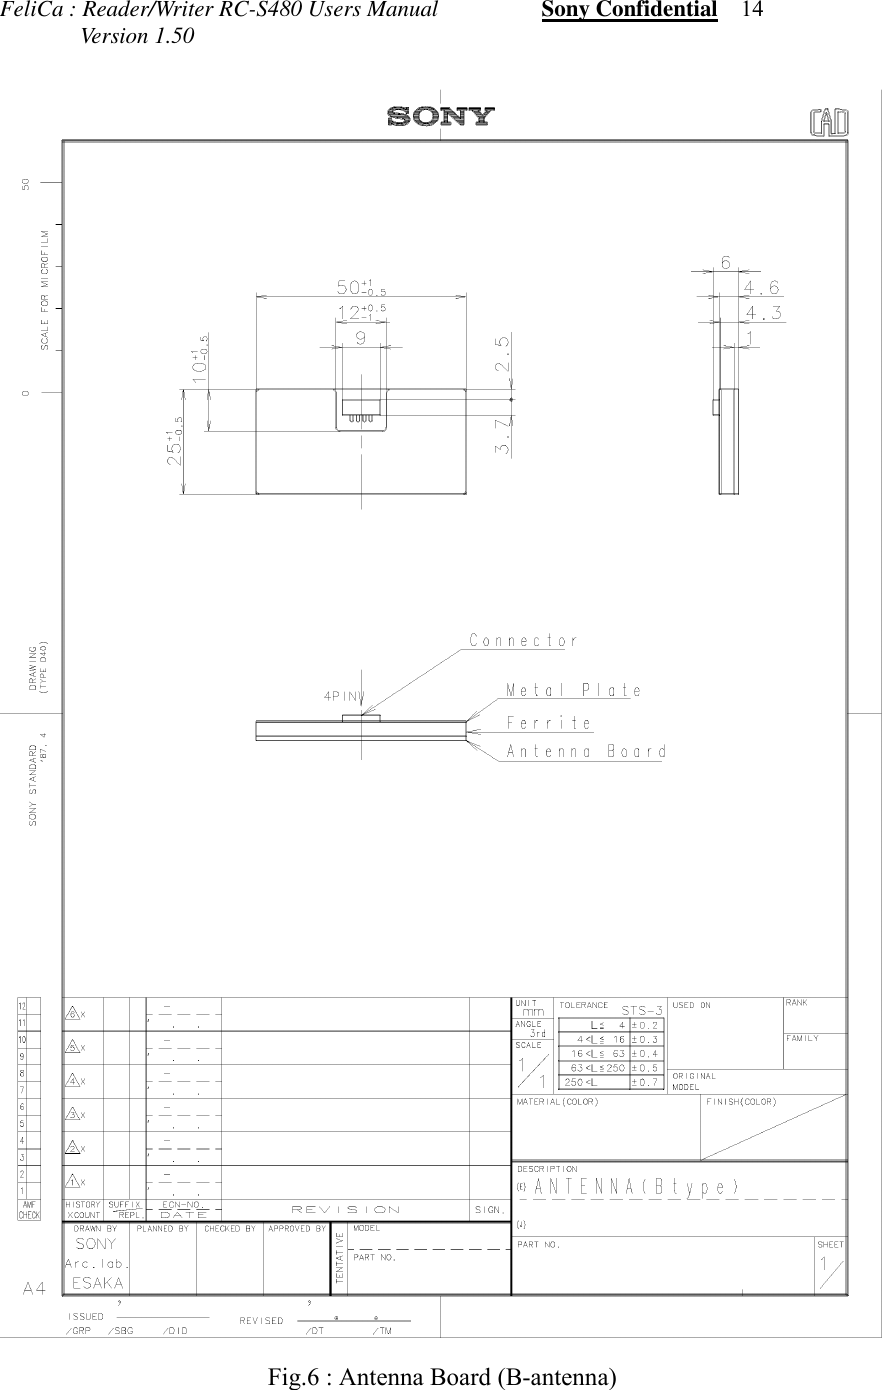 FeliCa : Reader/Writer RC-S480 Users Manual                  Sony Confidential    14              Version 1.50Fig.6 : Antenna Board (B-antenna)